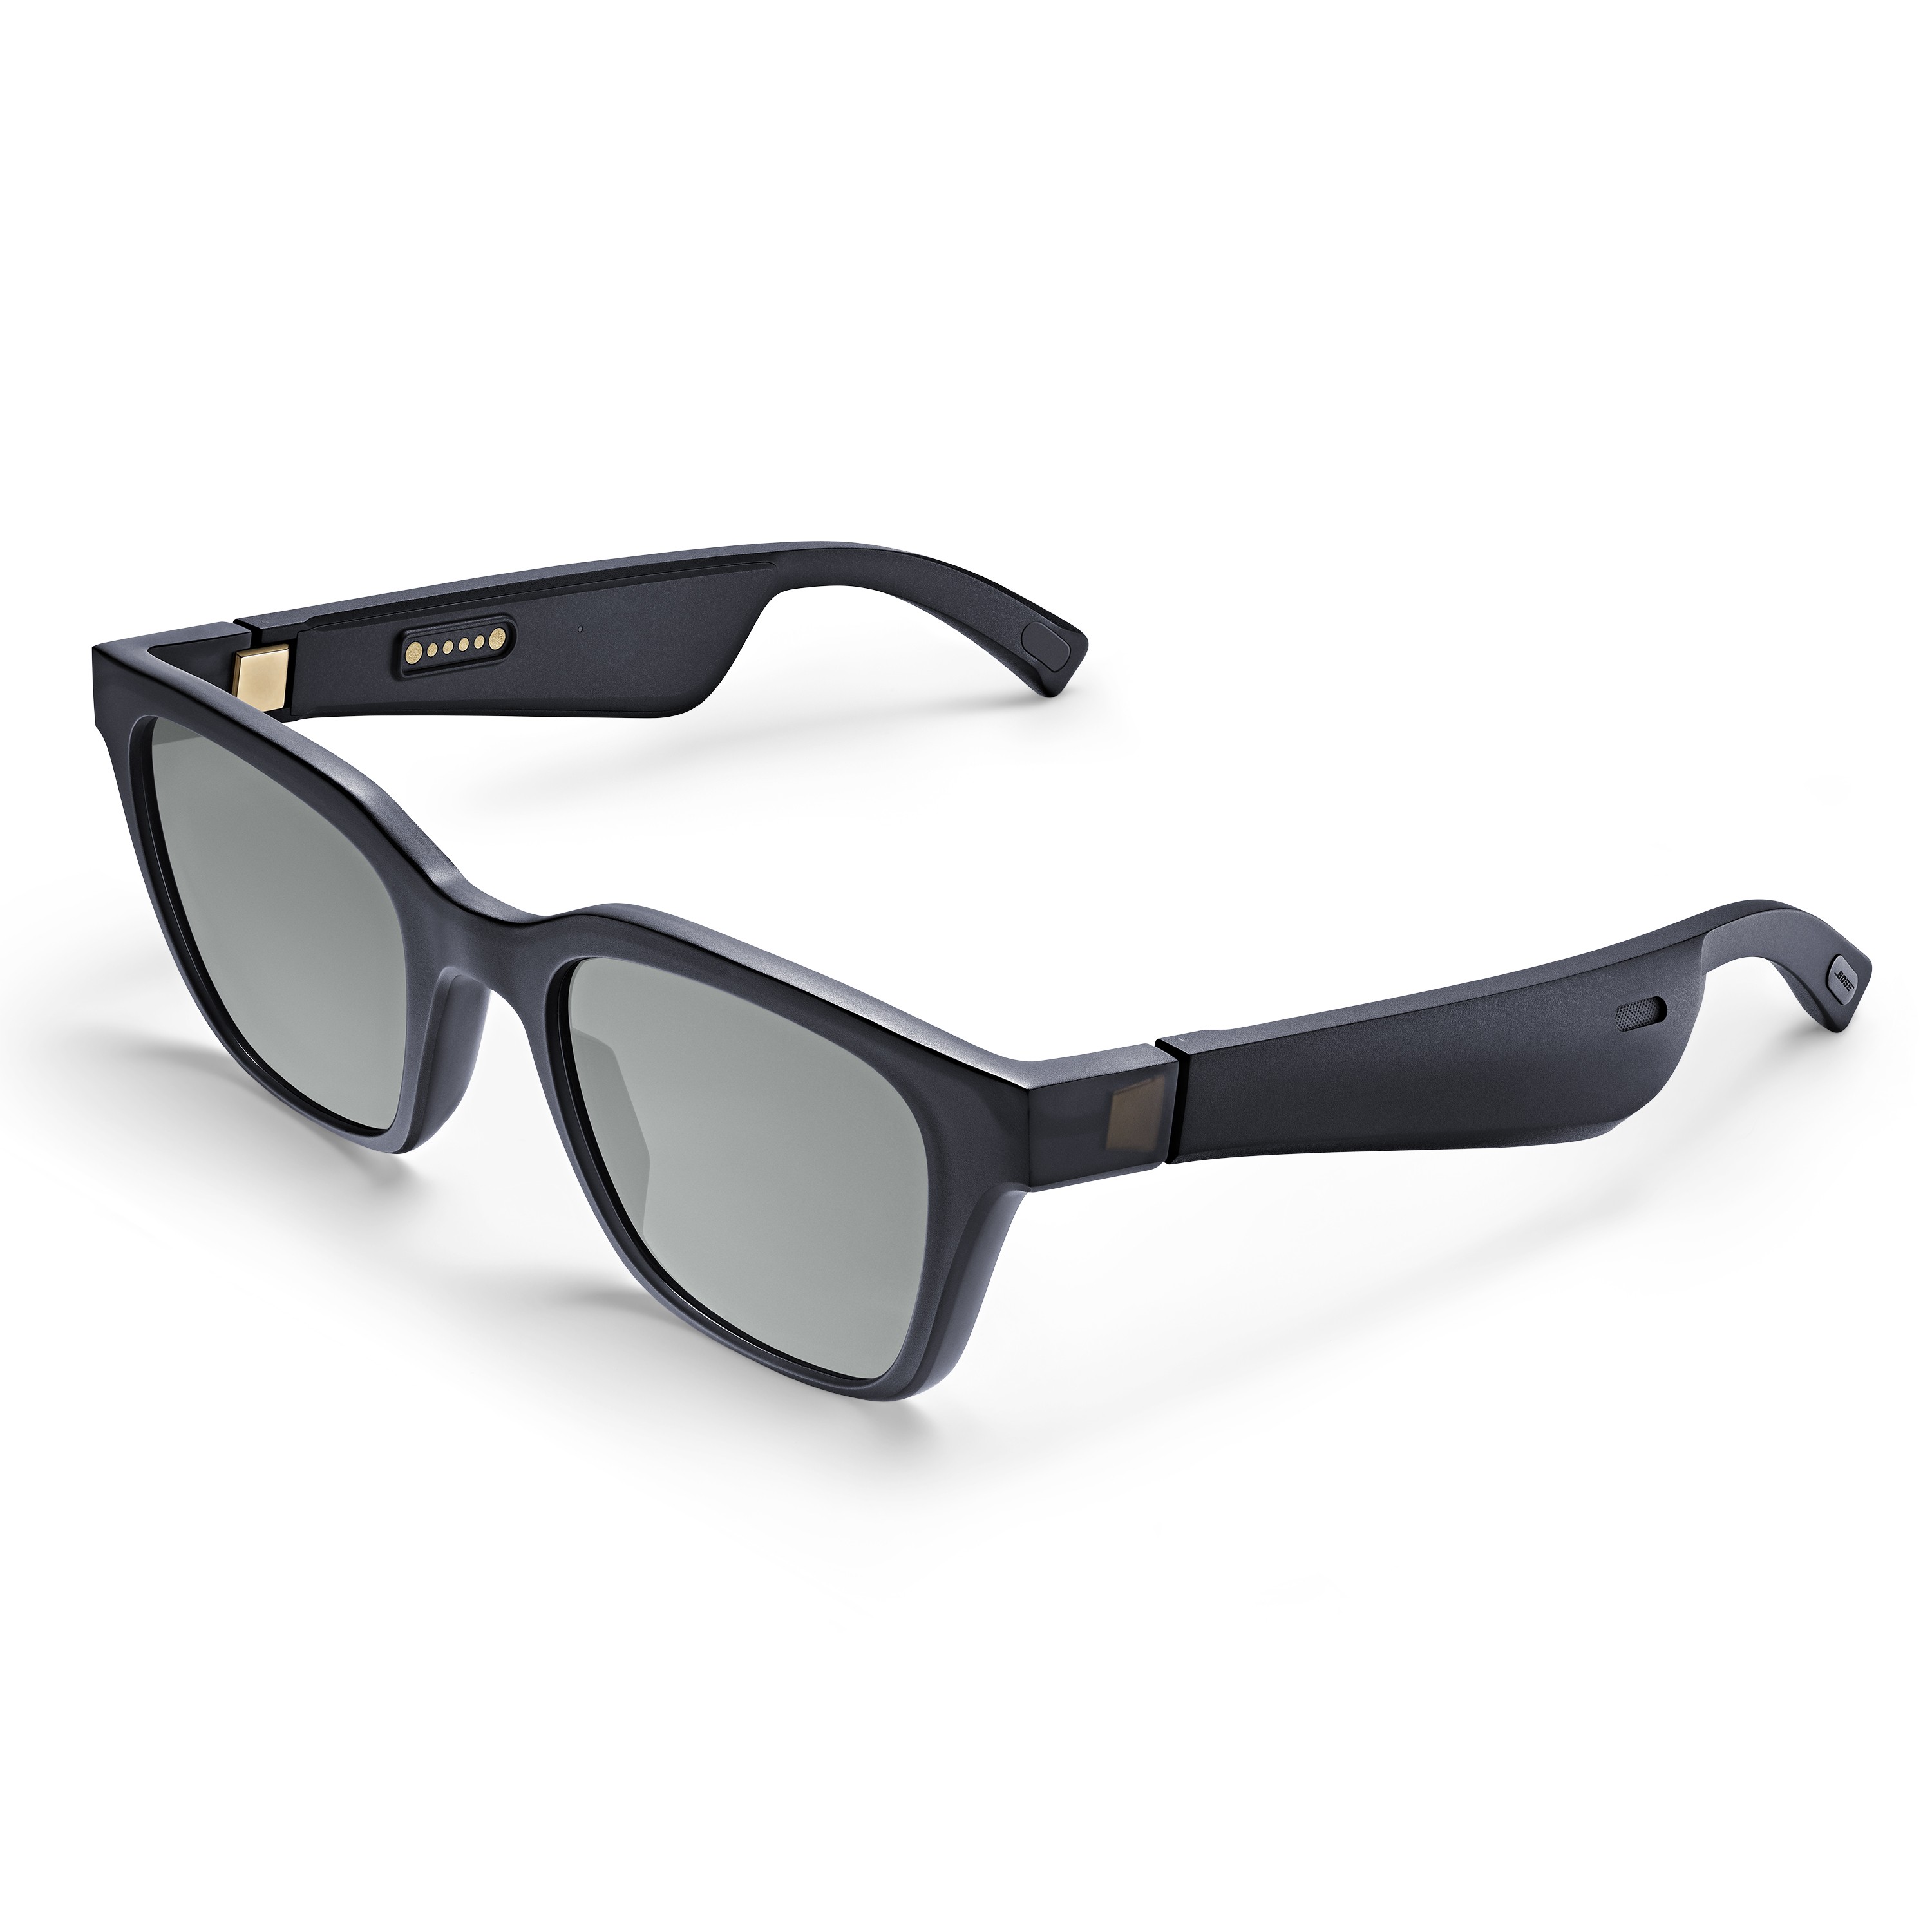 The Bose Frames smart glasses (shown here in the Alto style). Photo: Bose